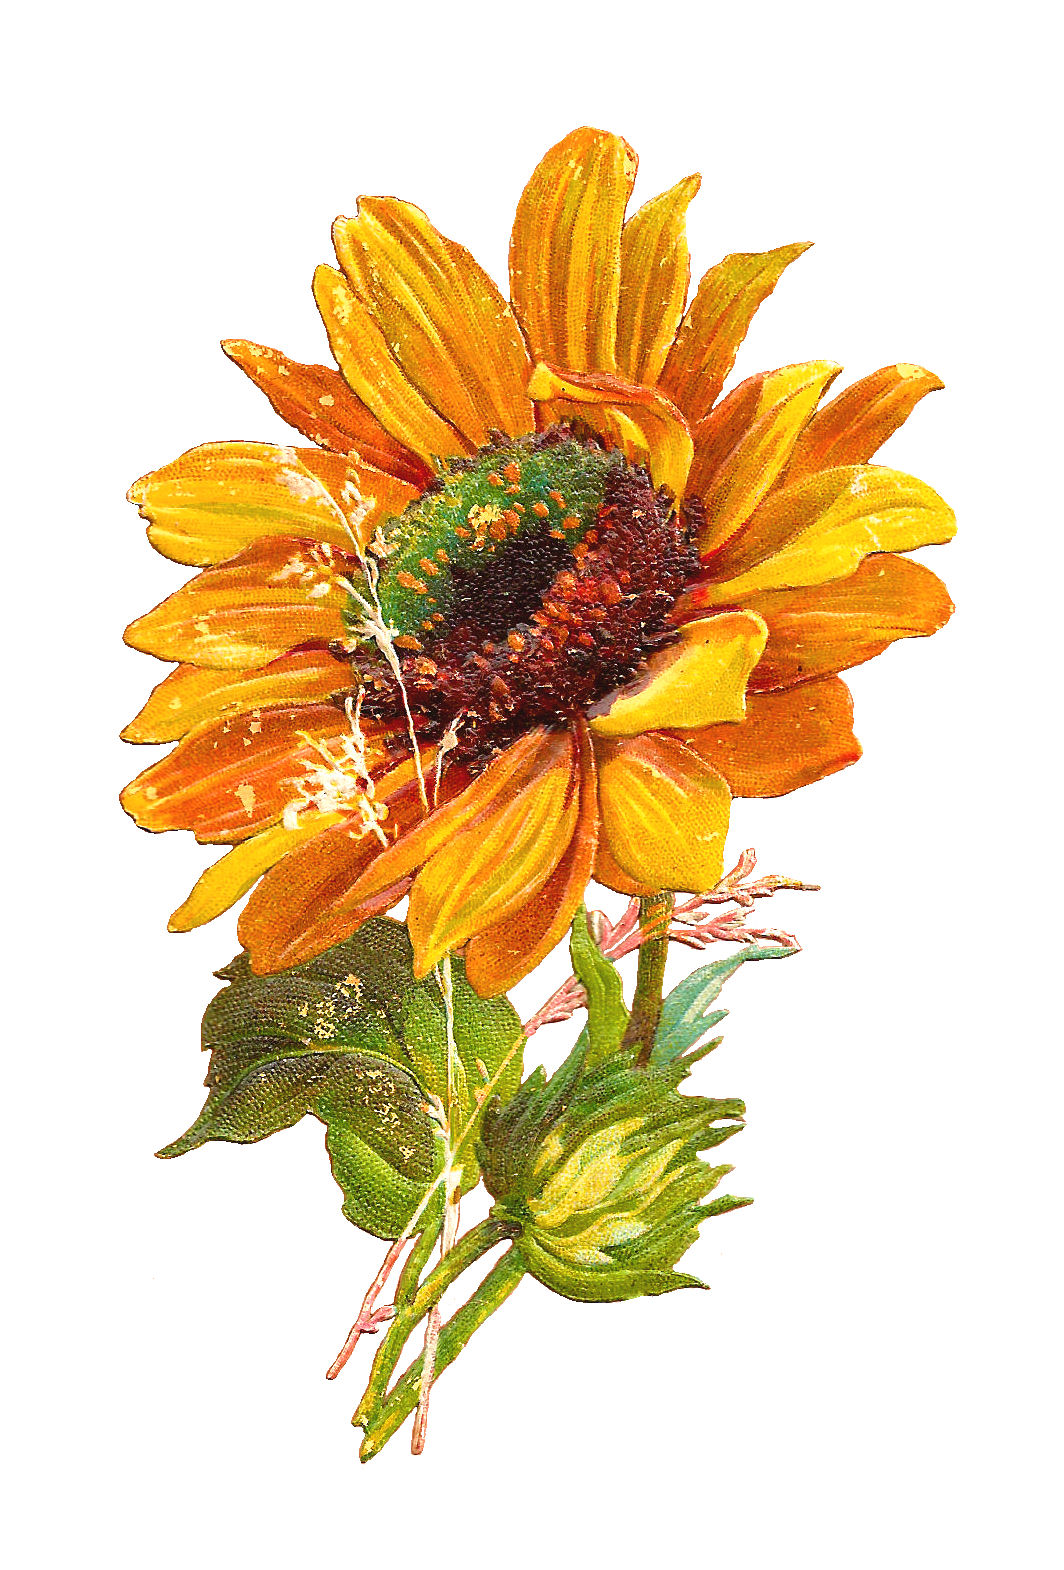 Antique Images: Free Flower Graphic: Sunflower Clip Art of 2 Victorian